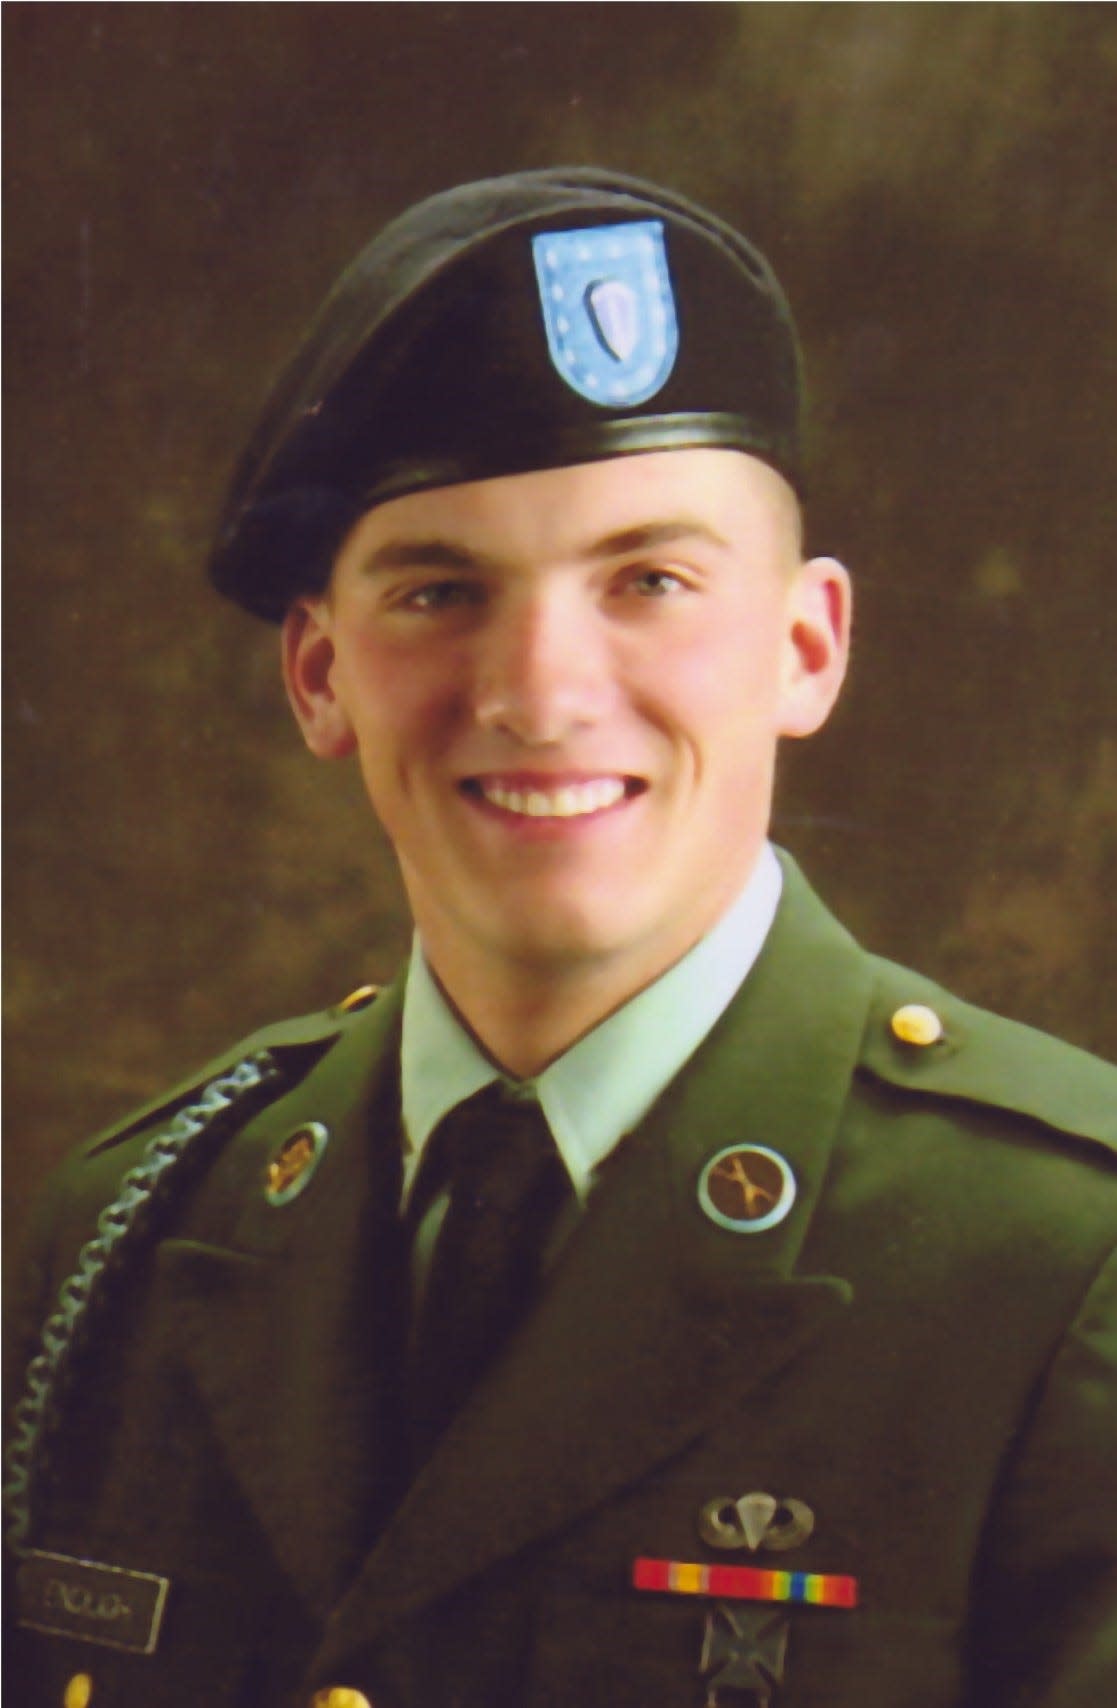 The city of Massillon has approved renaming a street to honor the late U.S. Army Sgt. Cory Endlich, a 2003 graduate of Washington High School. He died June 9, 2007, in Taji, Iraq.